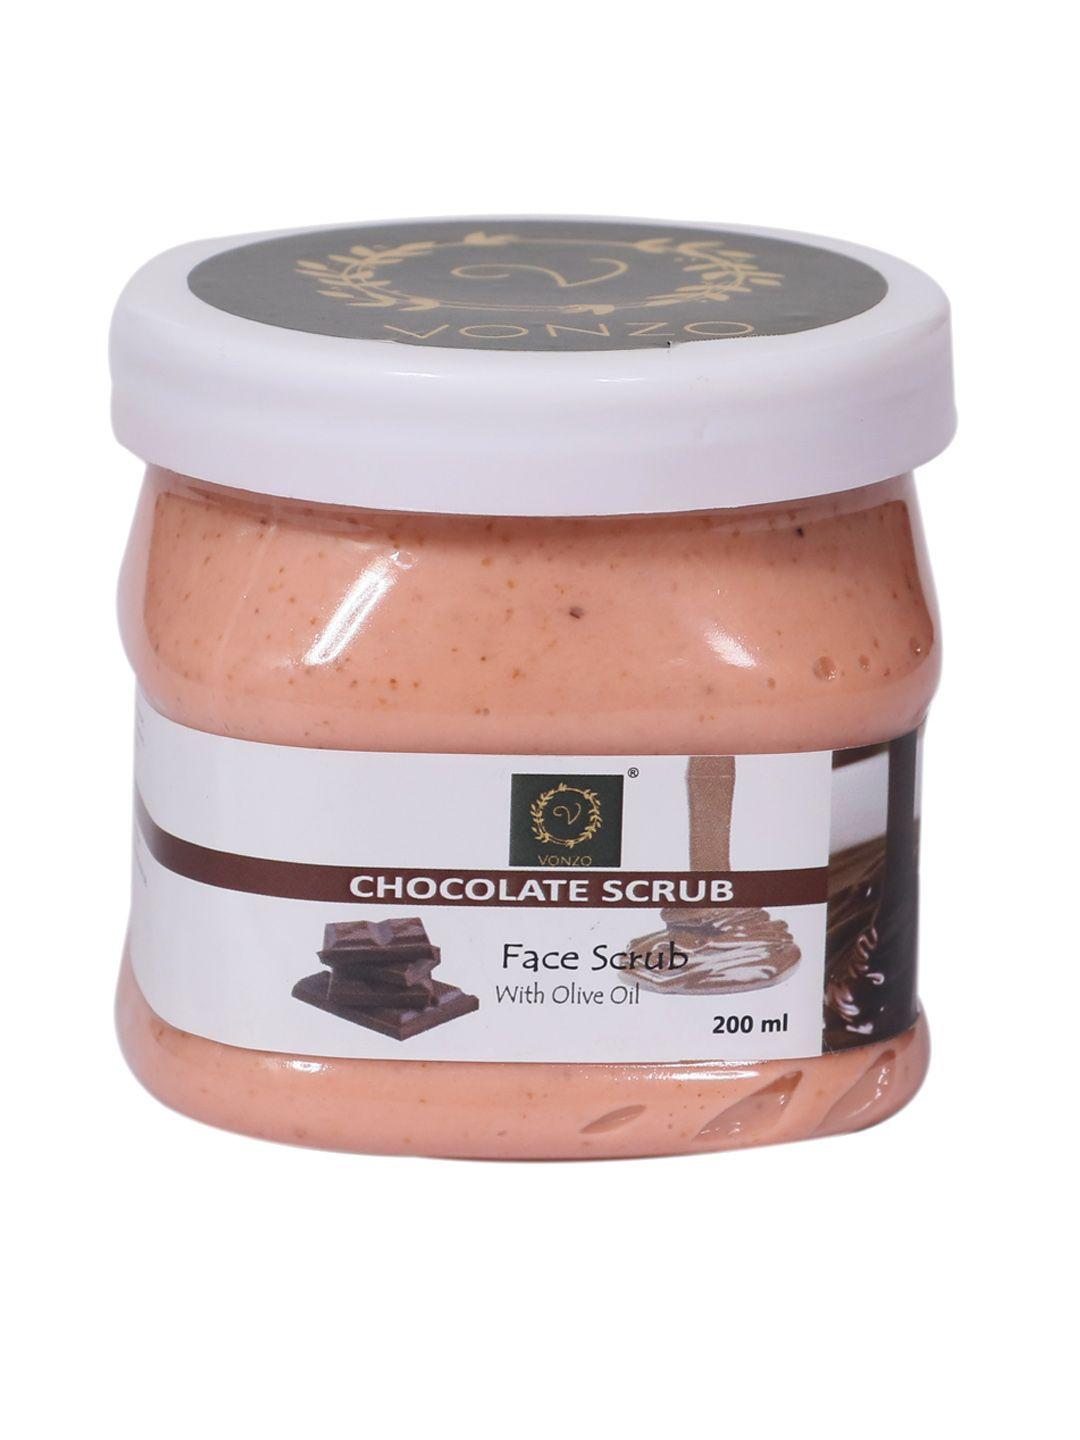 vonzo paraben free chocolate face scrub with olive oil for all skin types - 200 ml